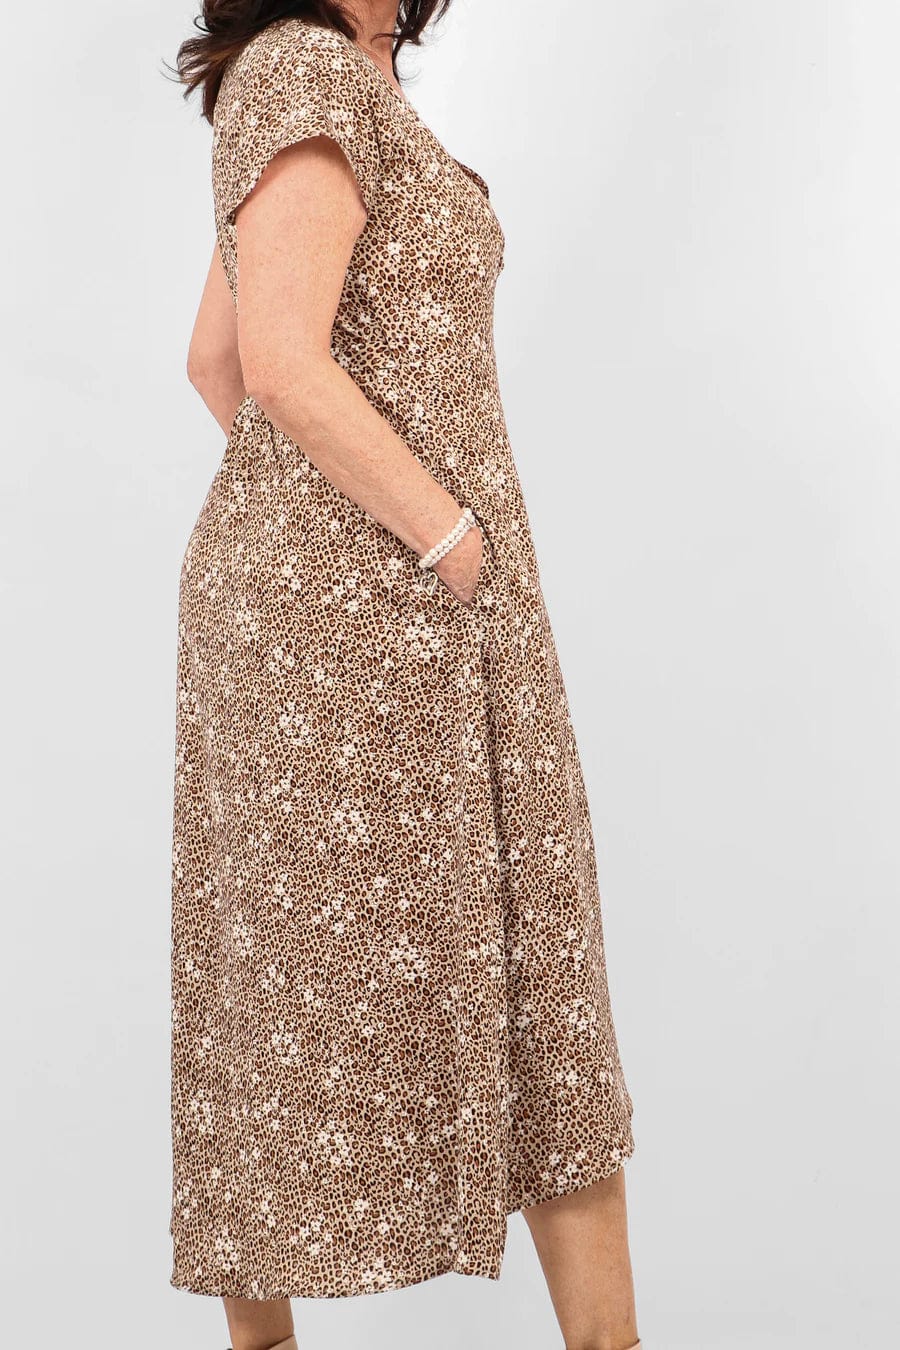 lusciousscarves Dresses Cream and Brown Animal Print with Small Floral Pattern Design Wrap Dress